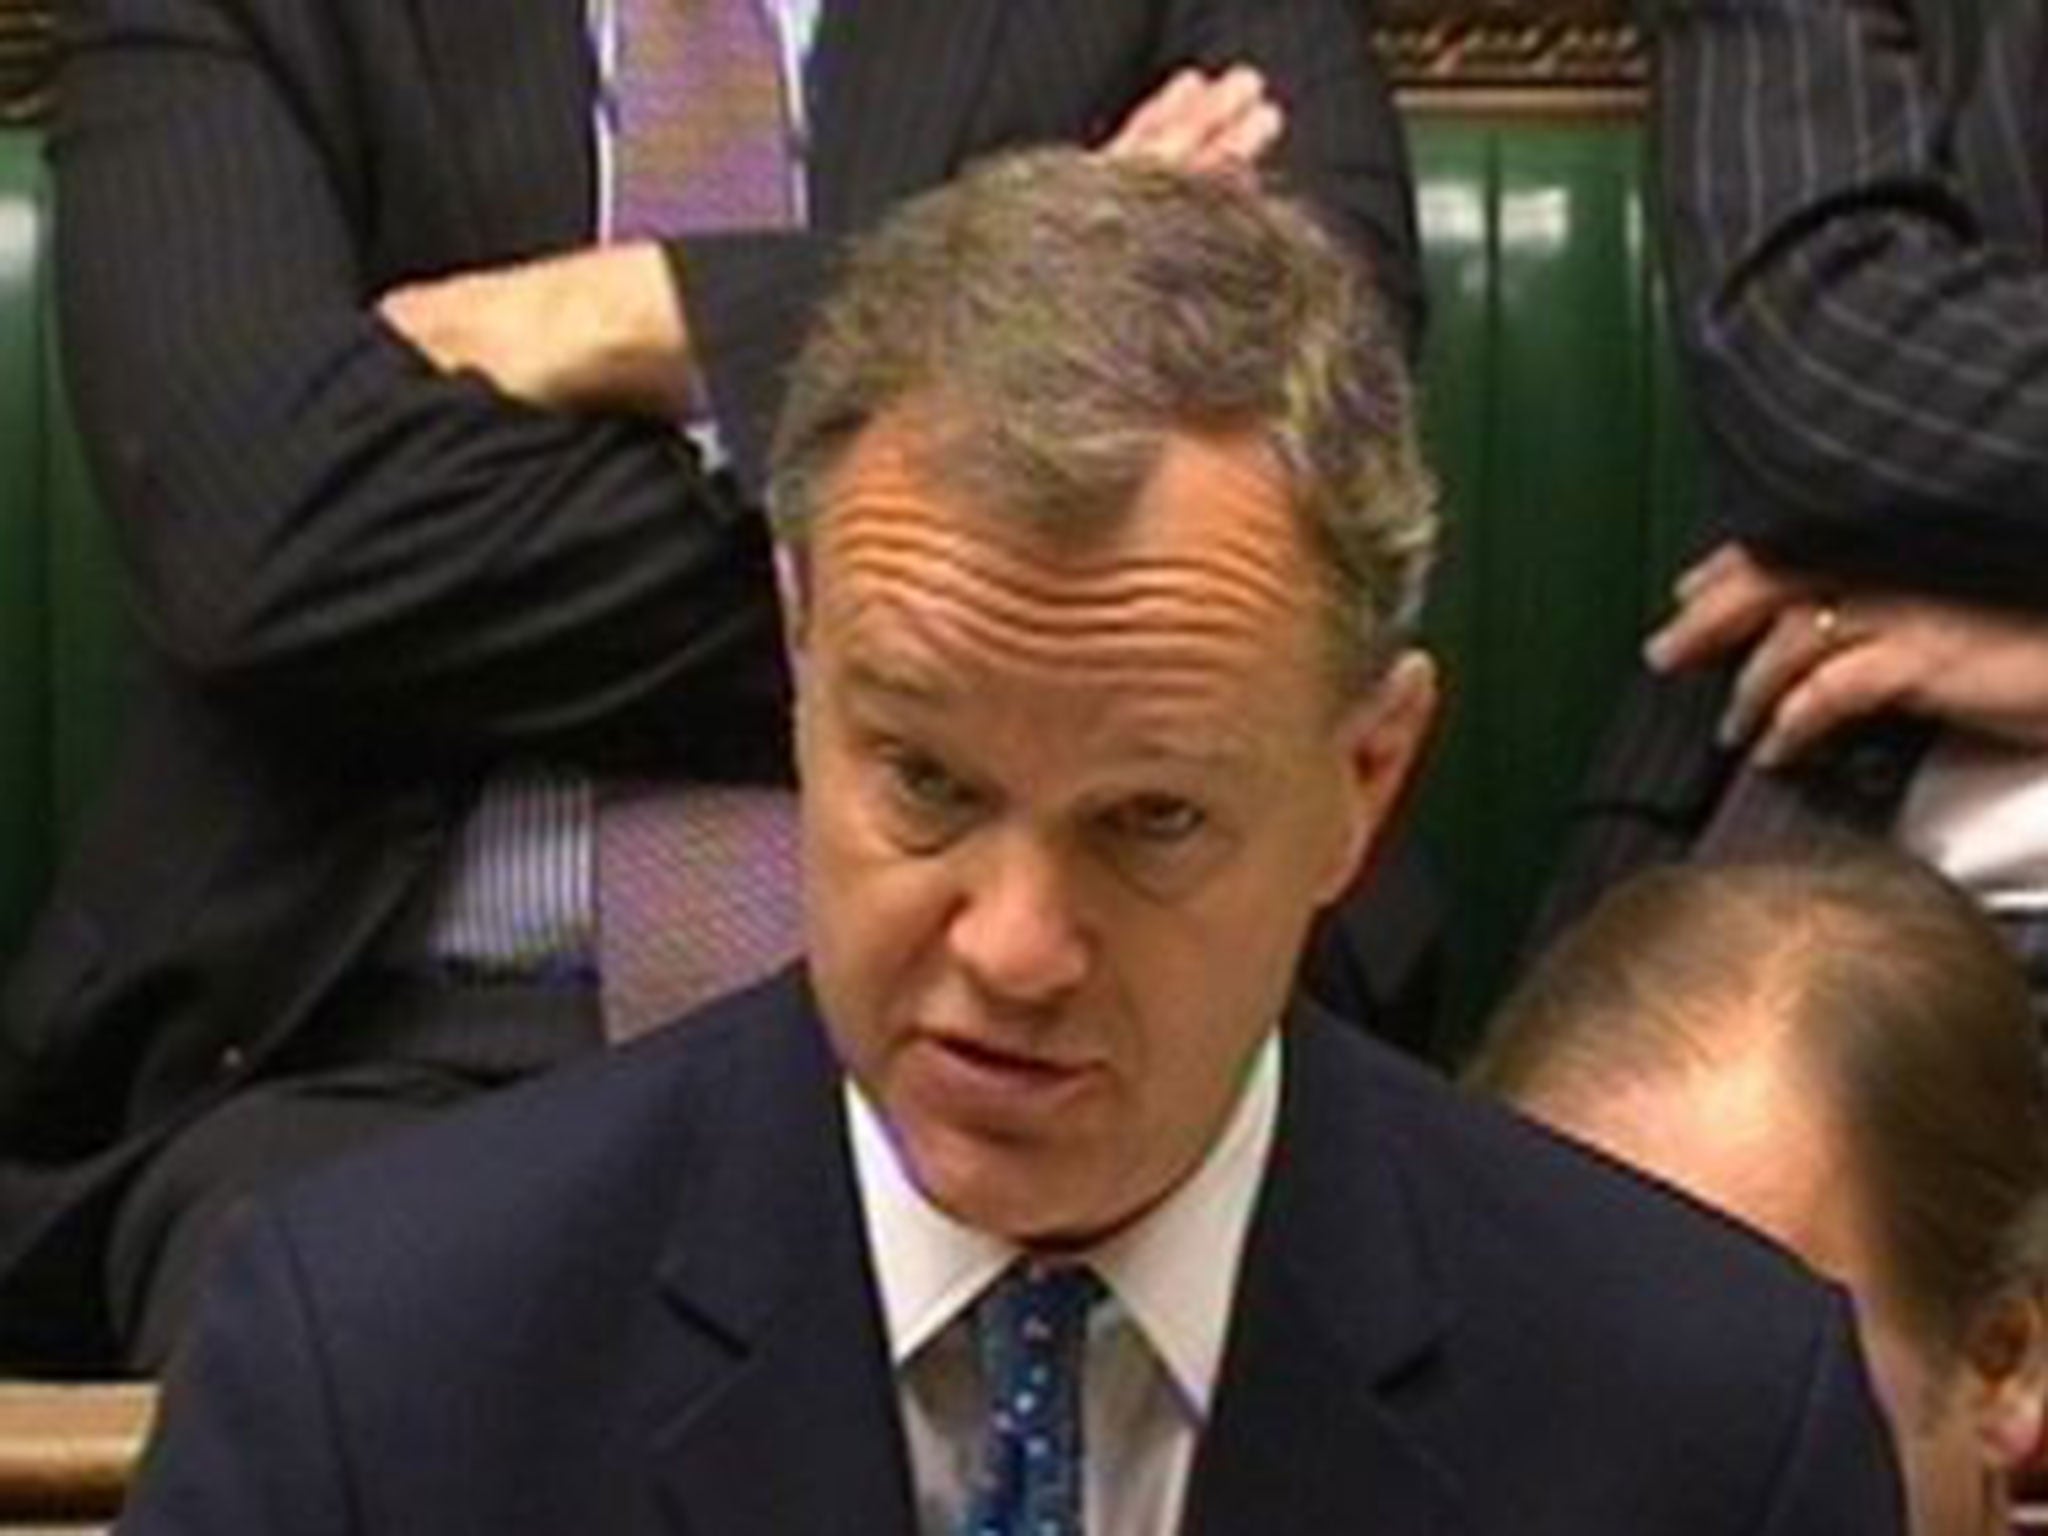 Foreign Office minister Mark Simmonds resigned over 'intolerable' pressure on his family life caused by pay